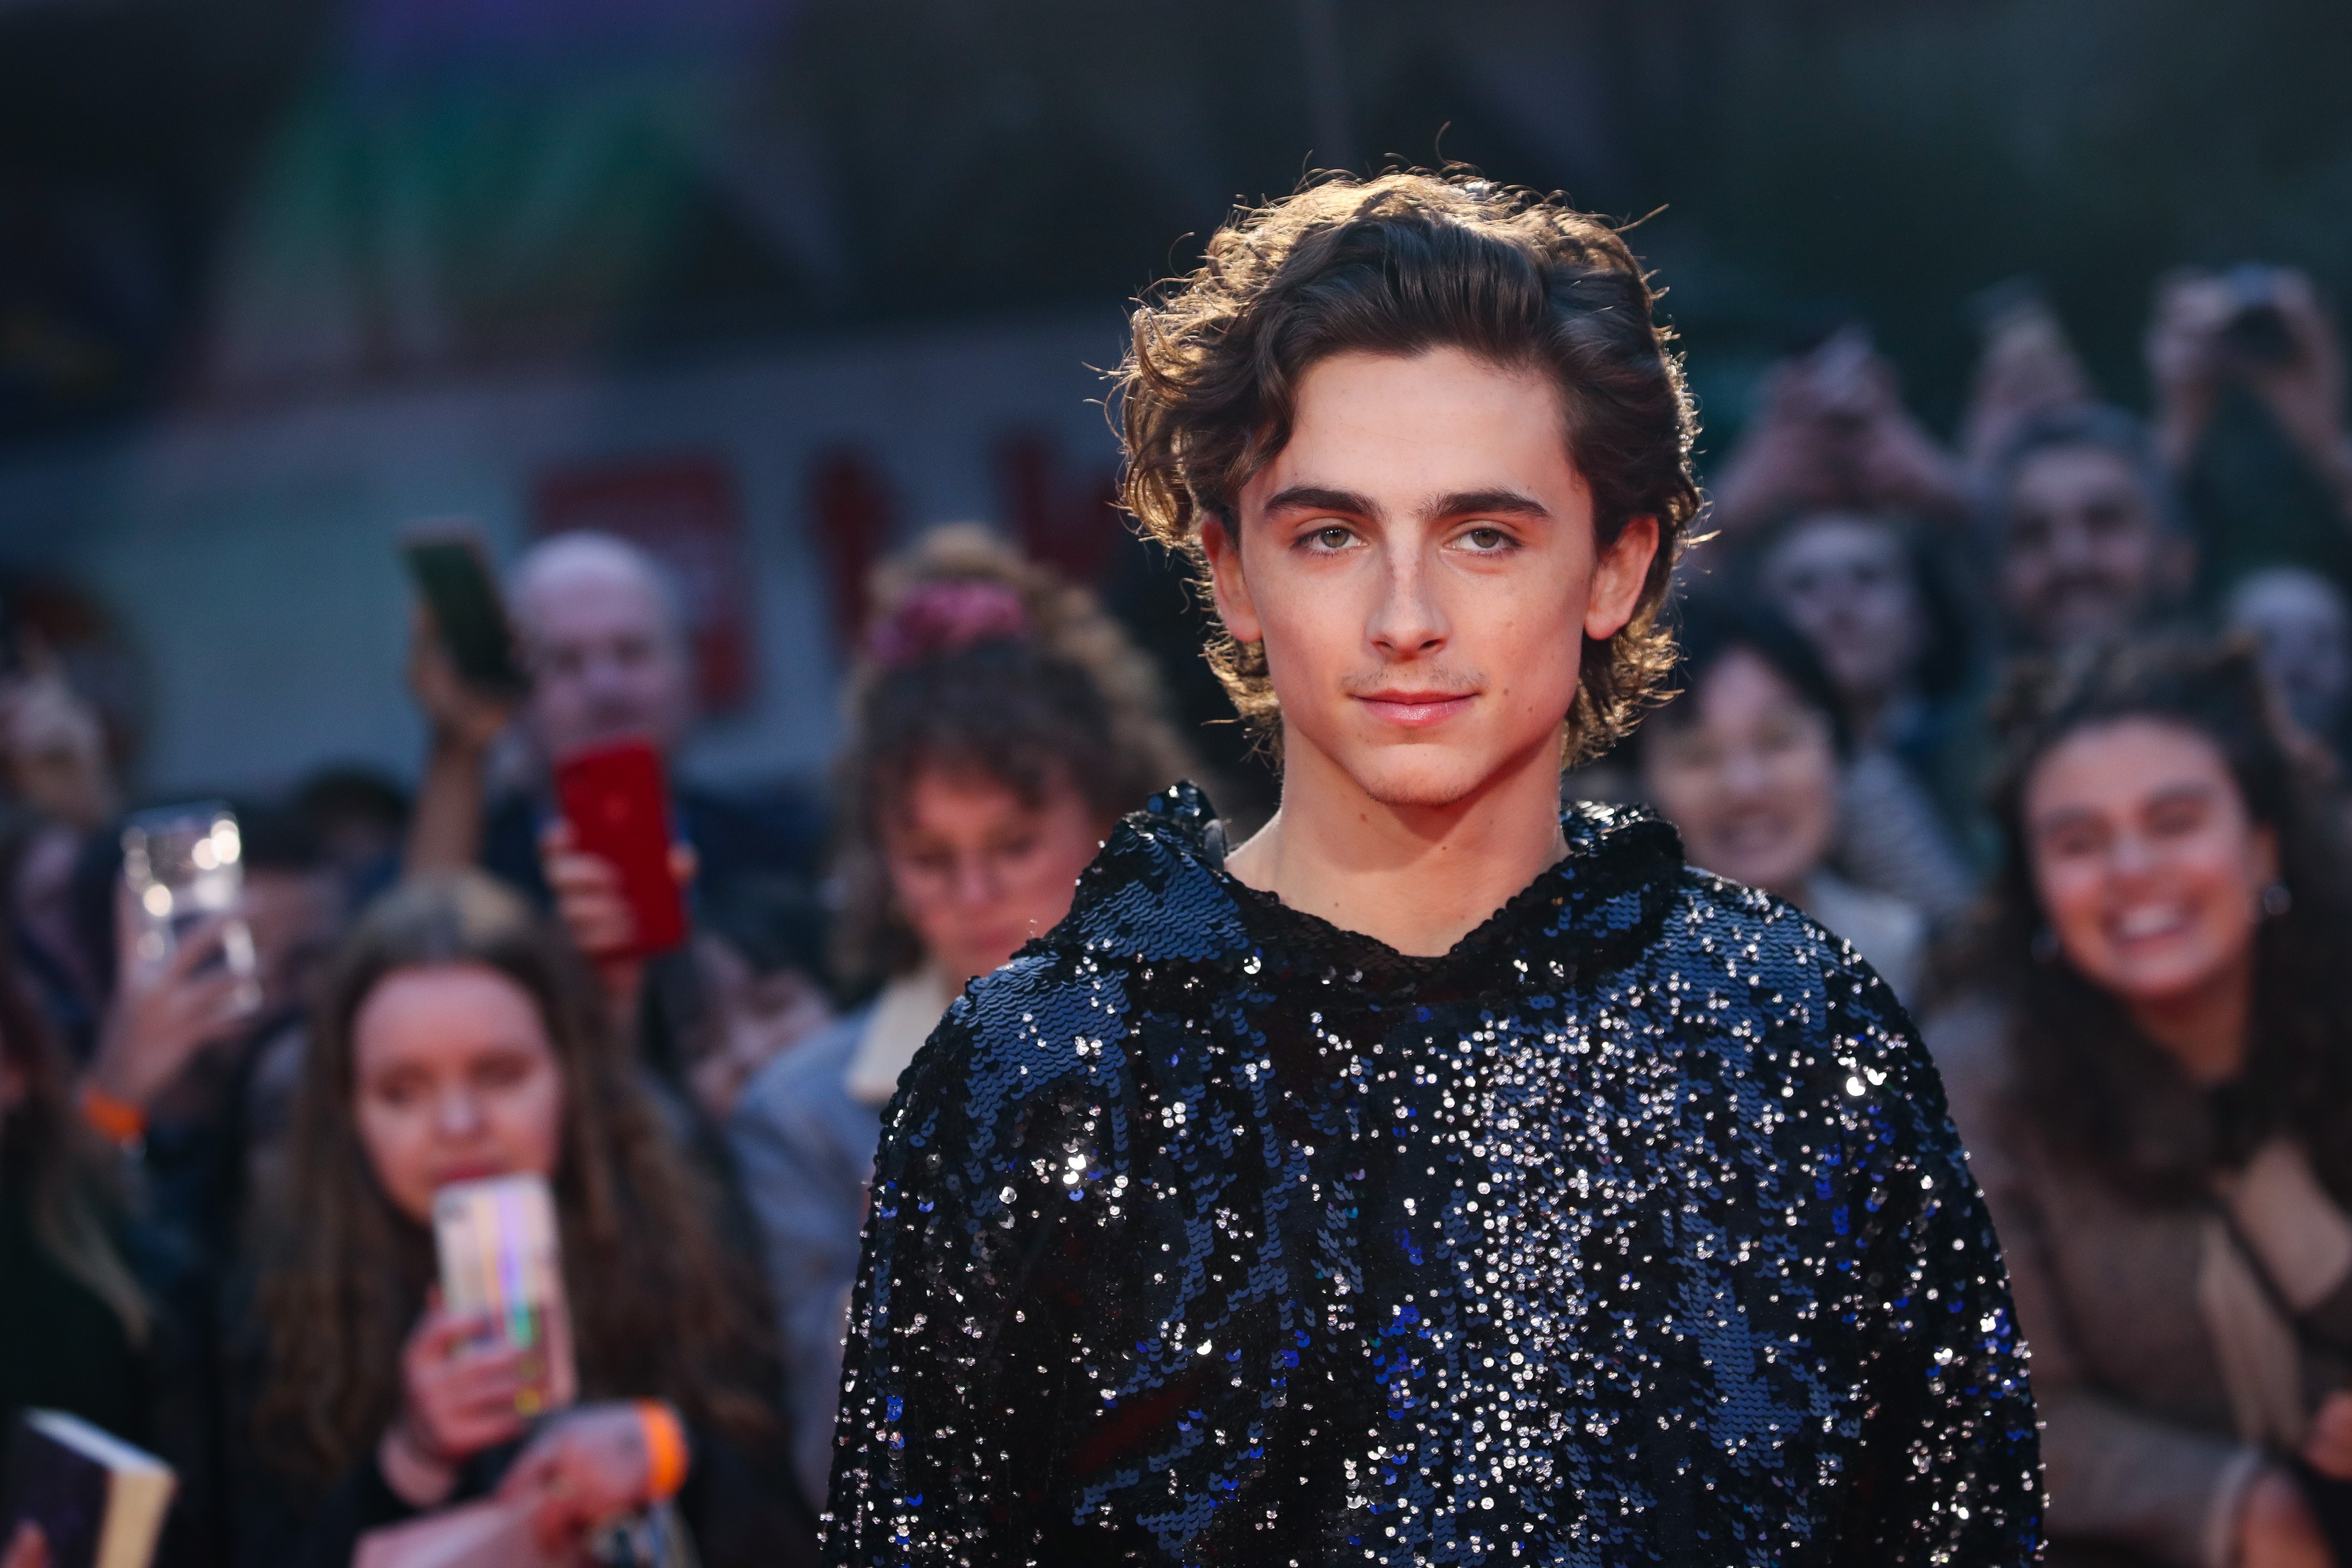 LONDON, ENGLAND - OCTOBER 03: Timothee Chalamet attends "The King" UK Premiere during the 63rd BFI London Film Festival at Odeon Luxe Leicester Square on October 03, 2019 in London, England. (Photo by Mike Marsland/WireImage) (Foto: Mike Marsland/WireImage)